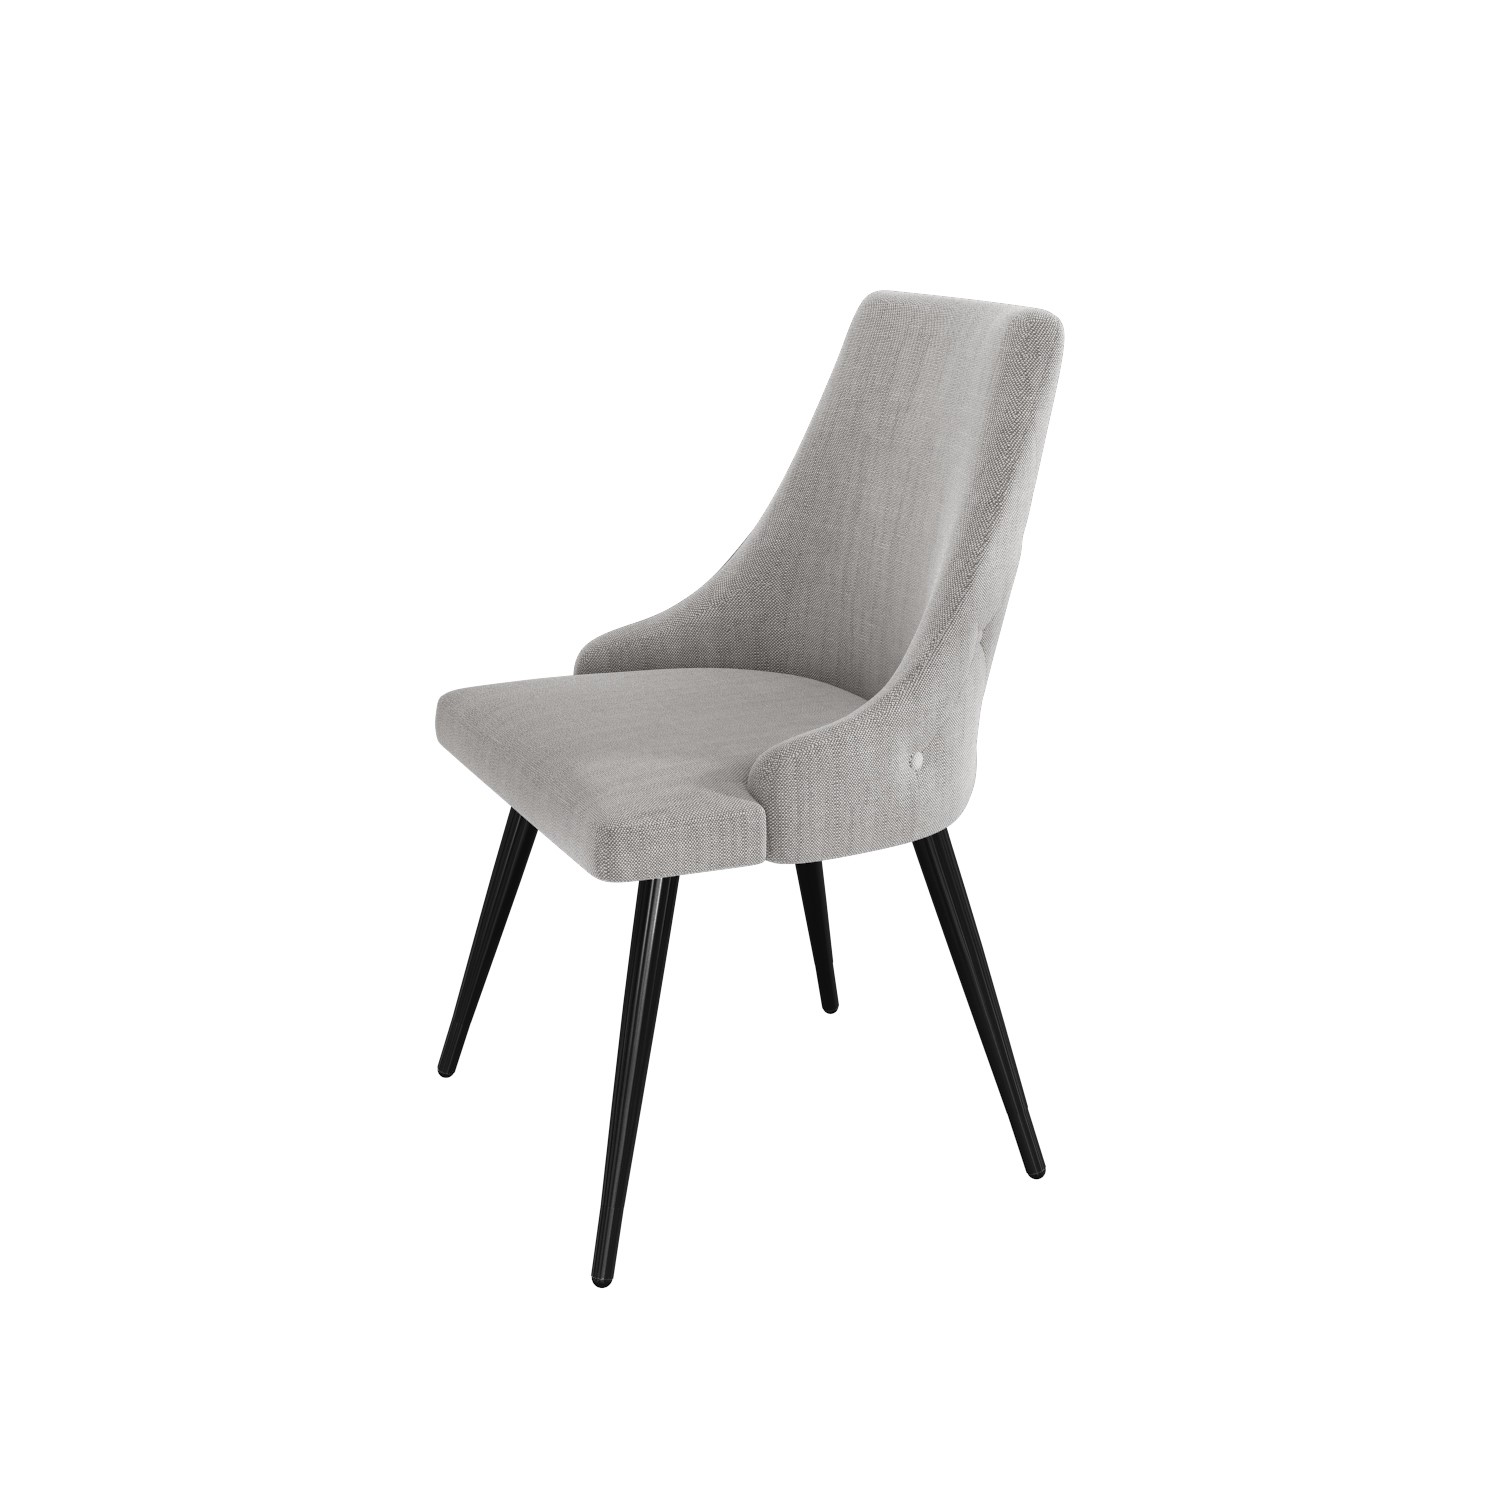 Pair Of Light Grey Fabric Dining Chairs, Grey Fabric Dining Room Chairs With Black Legs